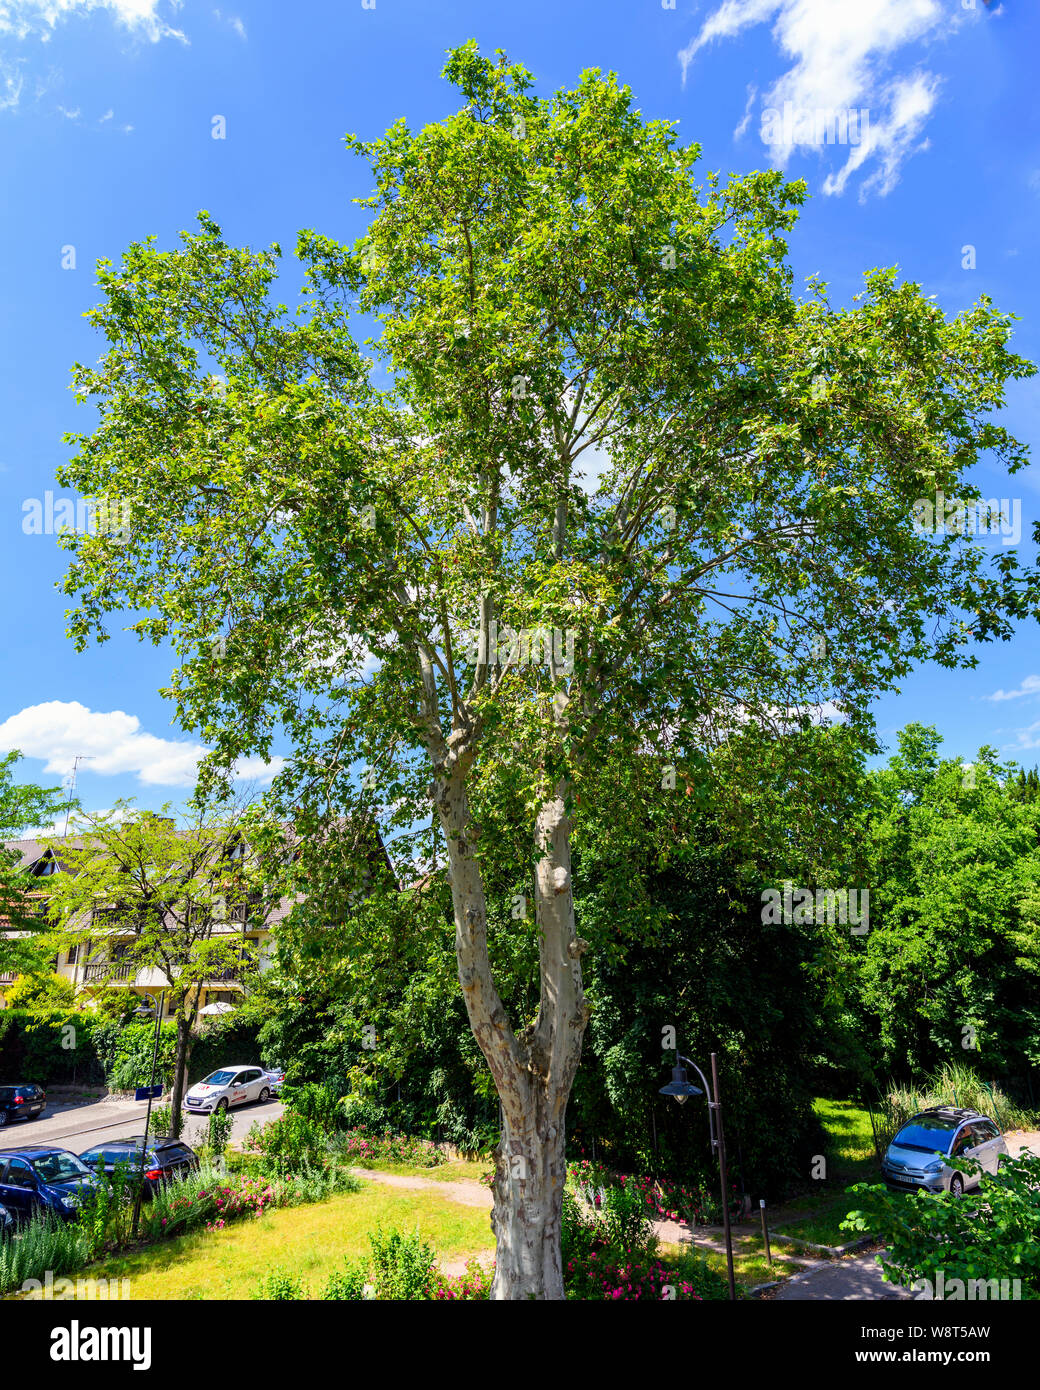 Plane tree with summer foliage, Alsace, France, Europe, Stock Photo